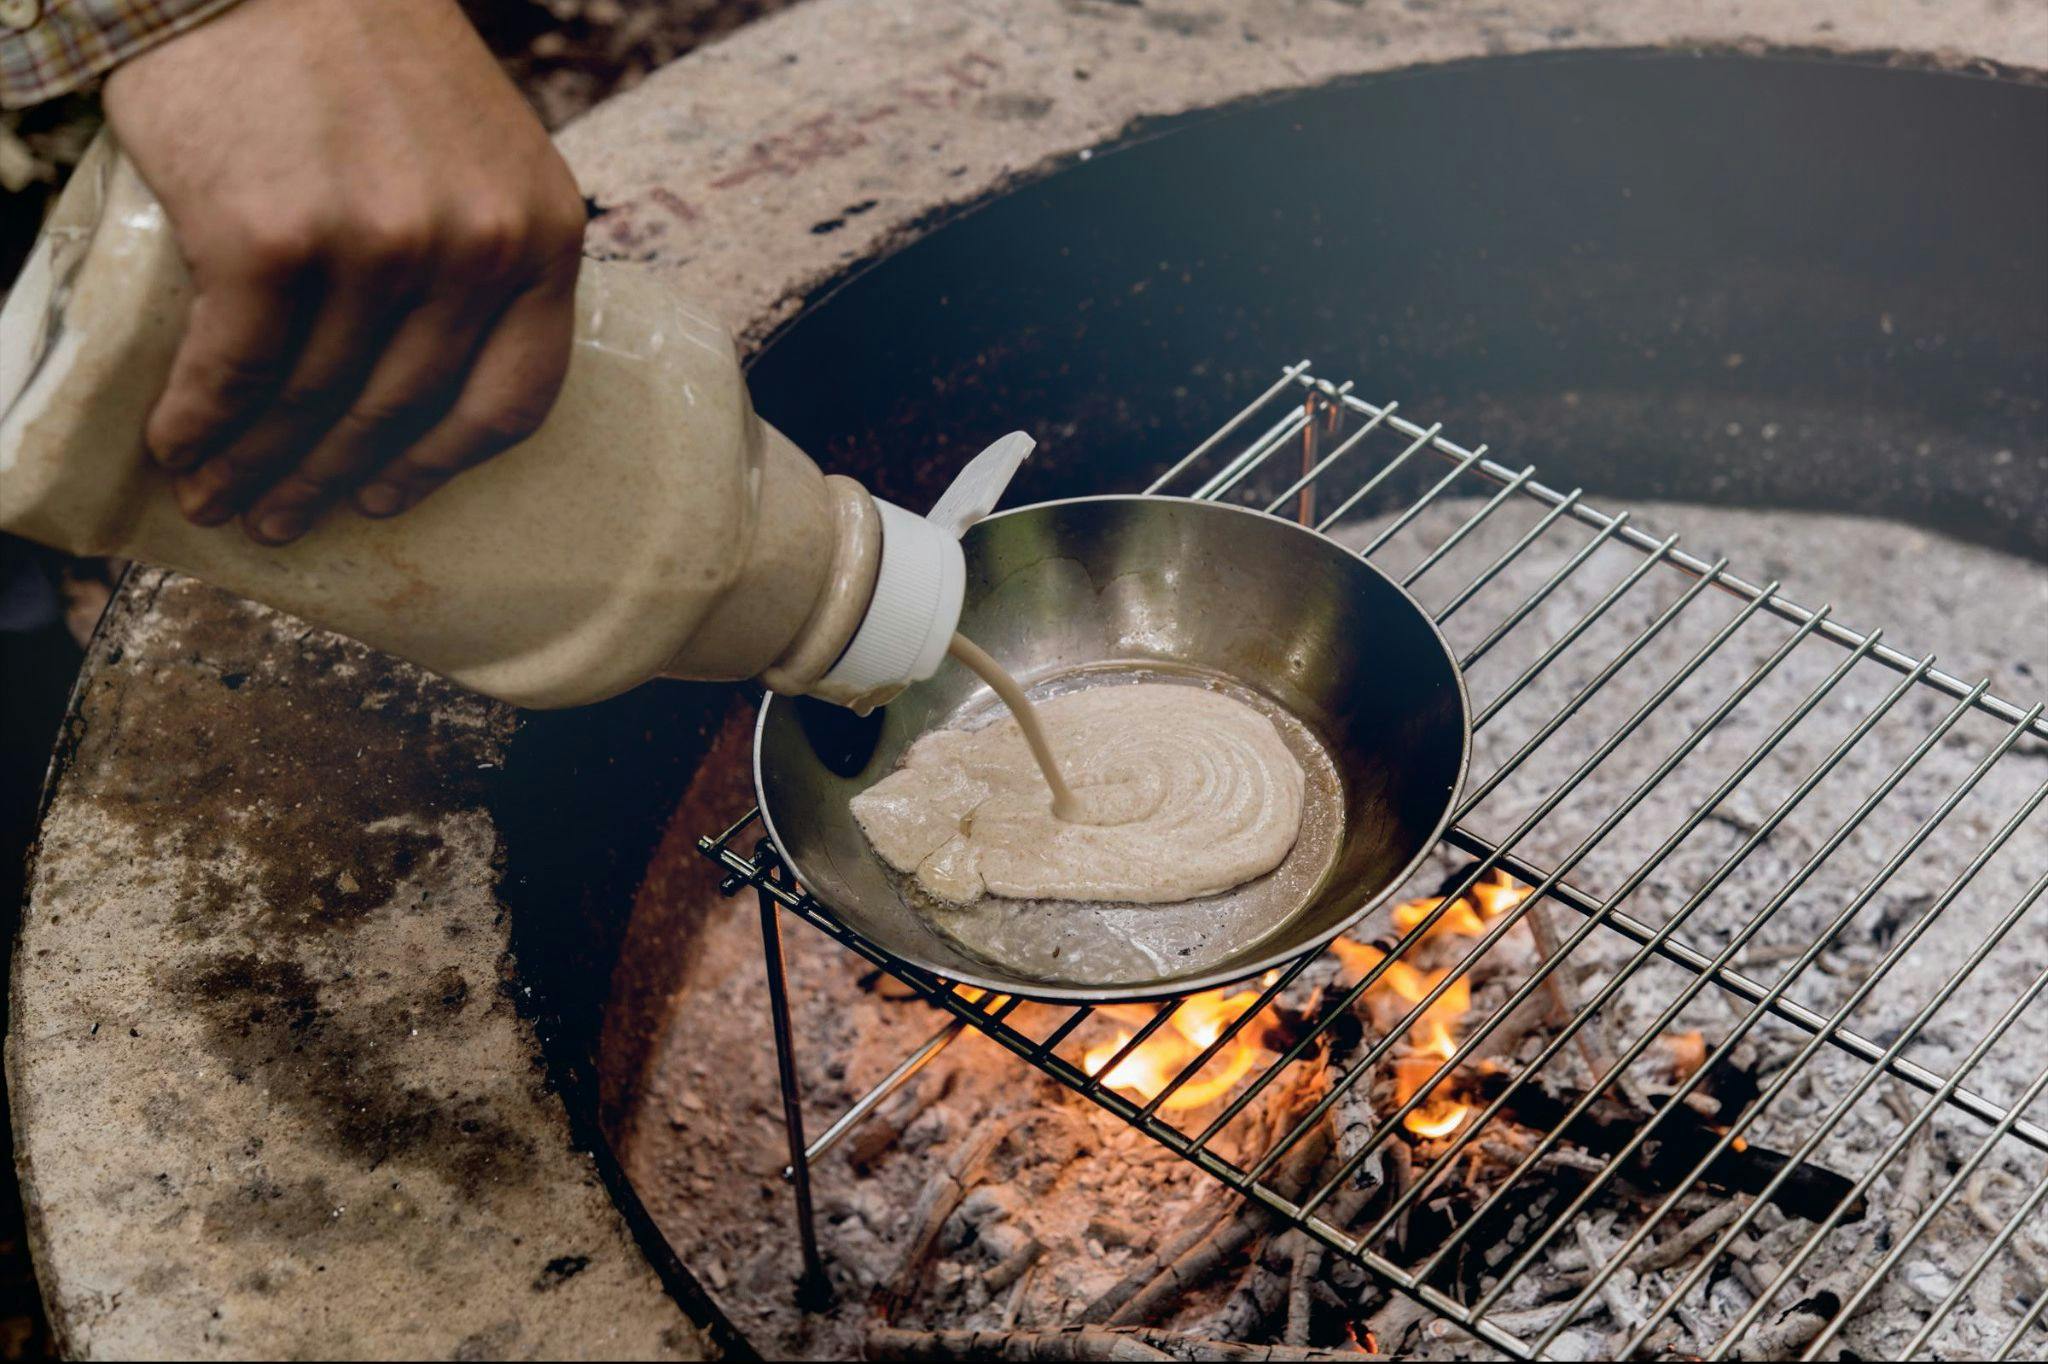 Someone squirting pancake batter from an old ketchup bottle into a pan over a campfire